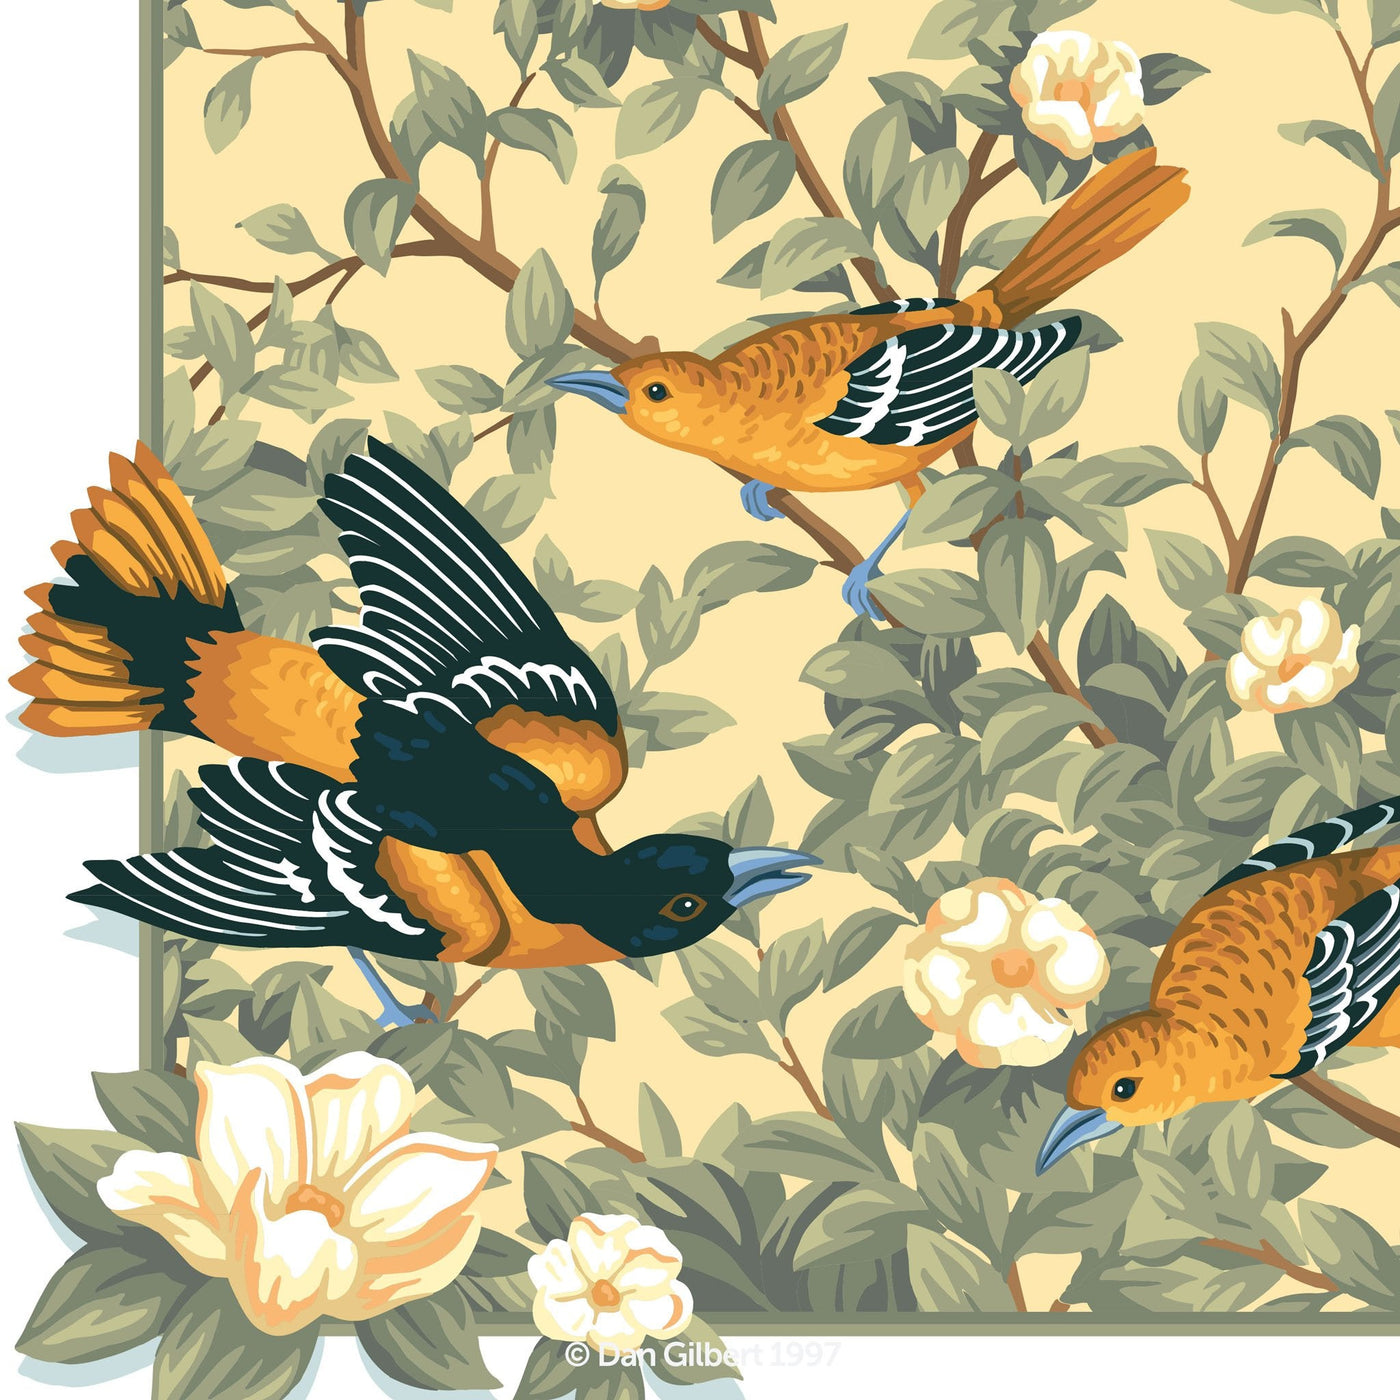 Limited Edition Giclée - Orioles - by Dan Gilbert